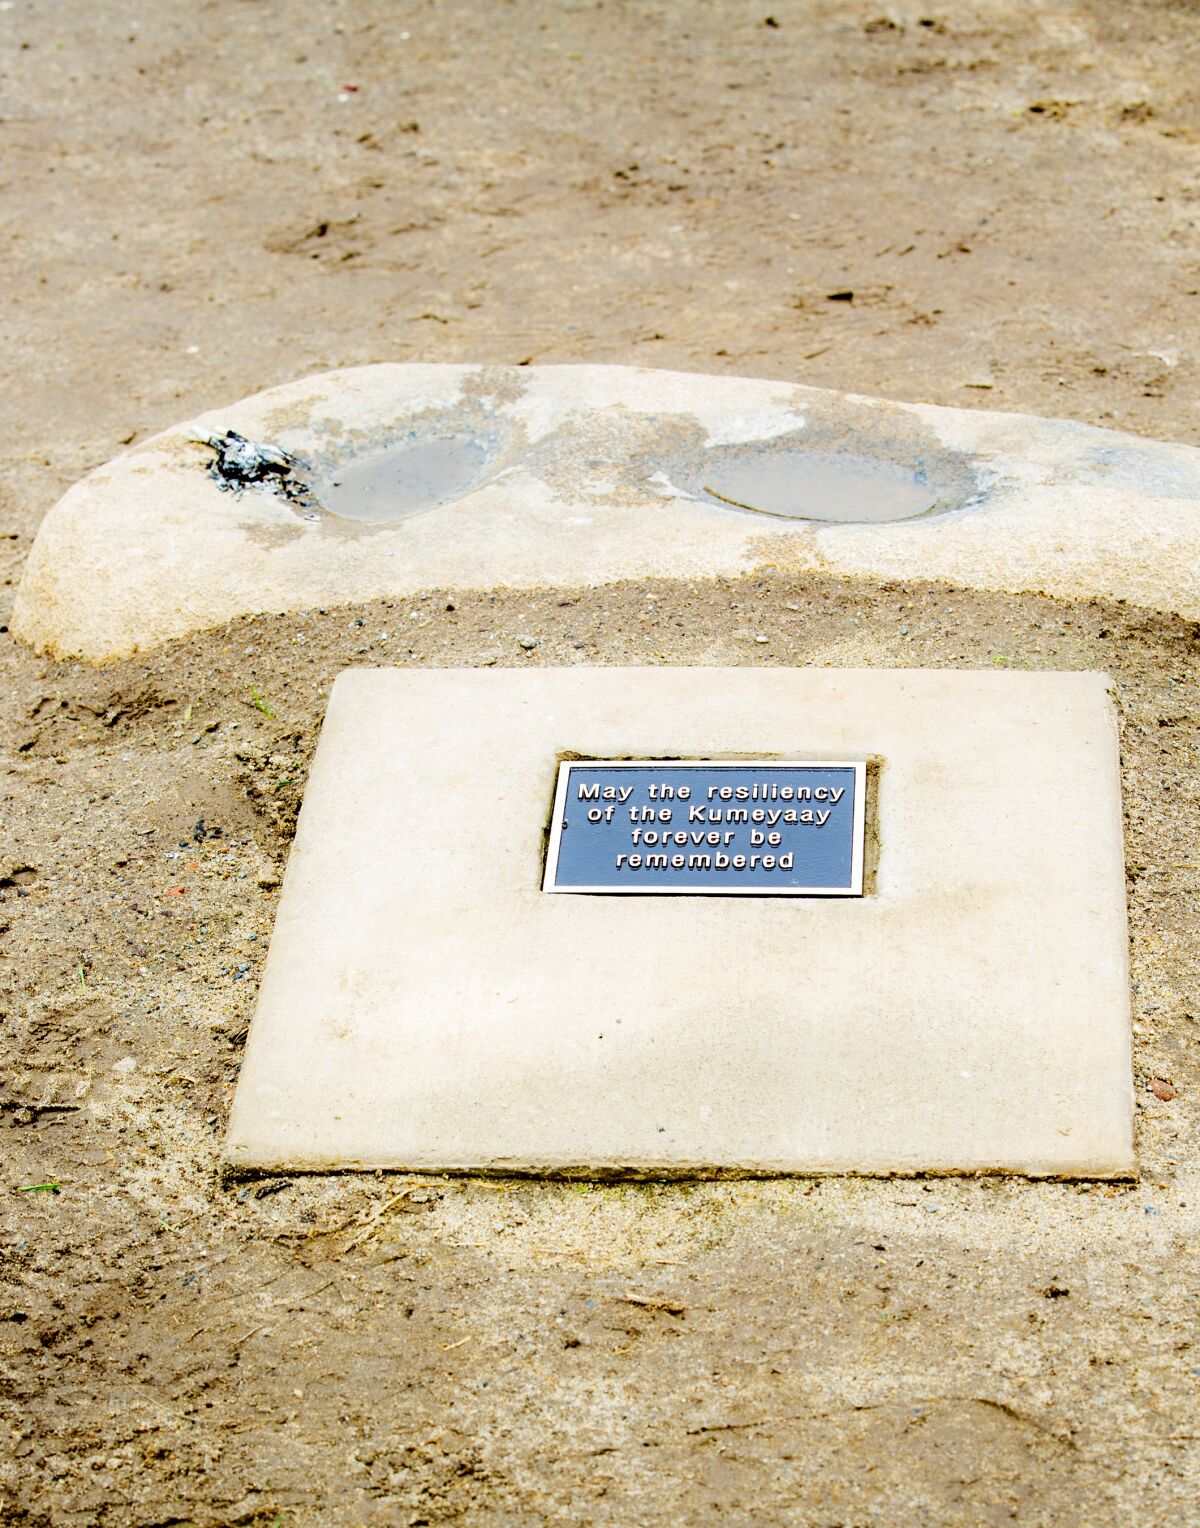 A plaque is placed in front of the bedrock mortar in Cuvier Park.